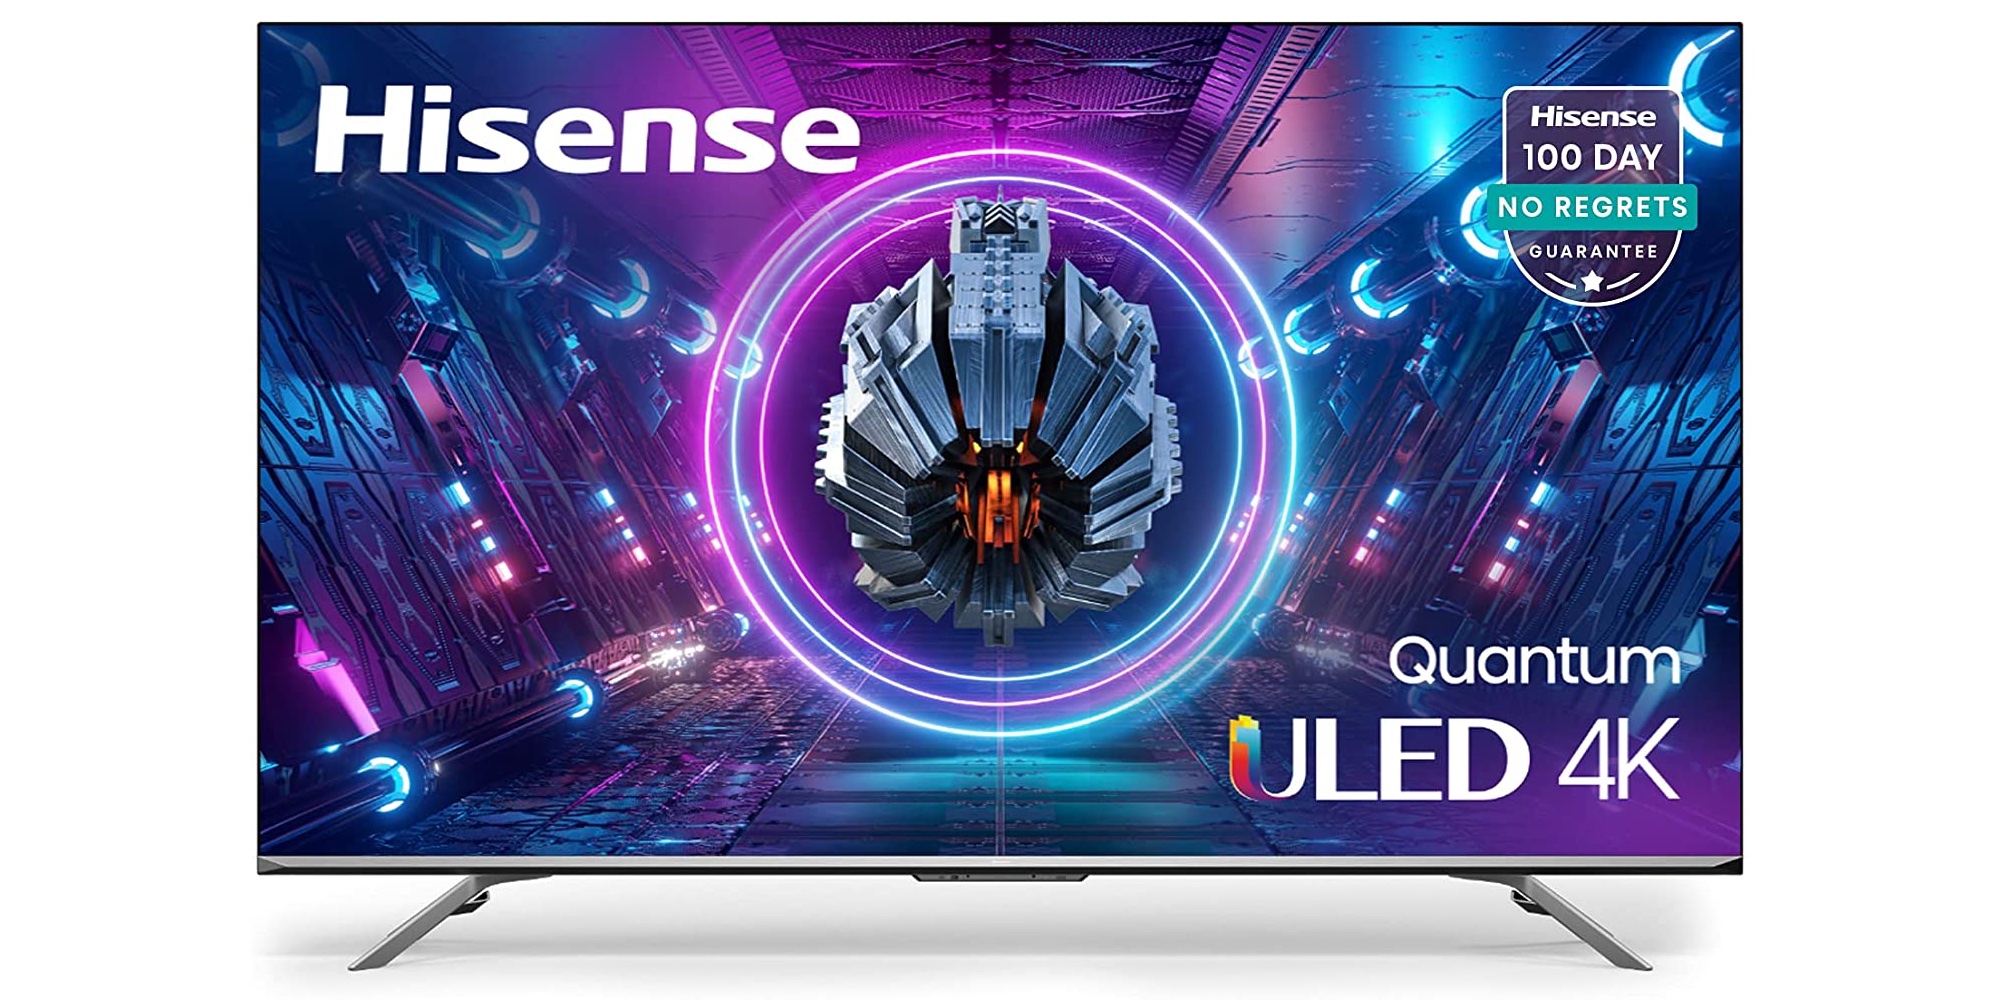 Save $100 on Hisense's latest 4K 120Hz Android TVs with HDMI 2.1 at   lows